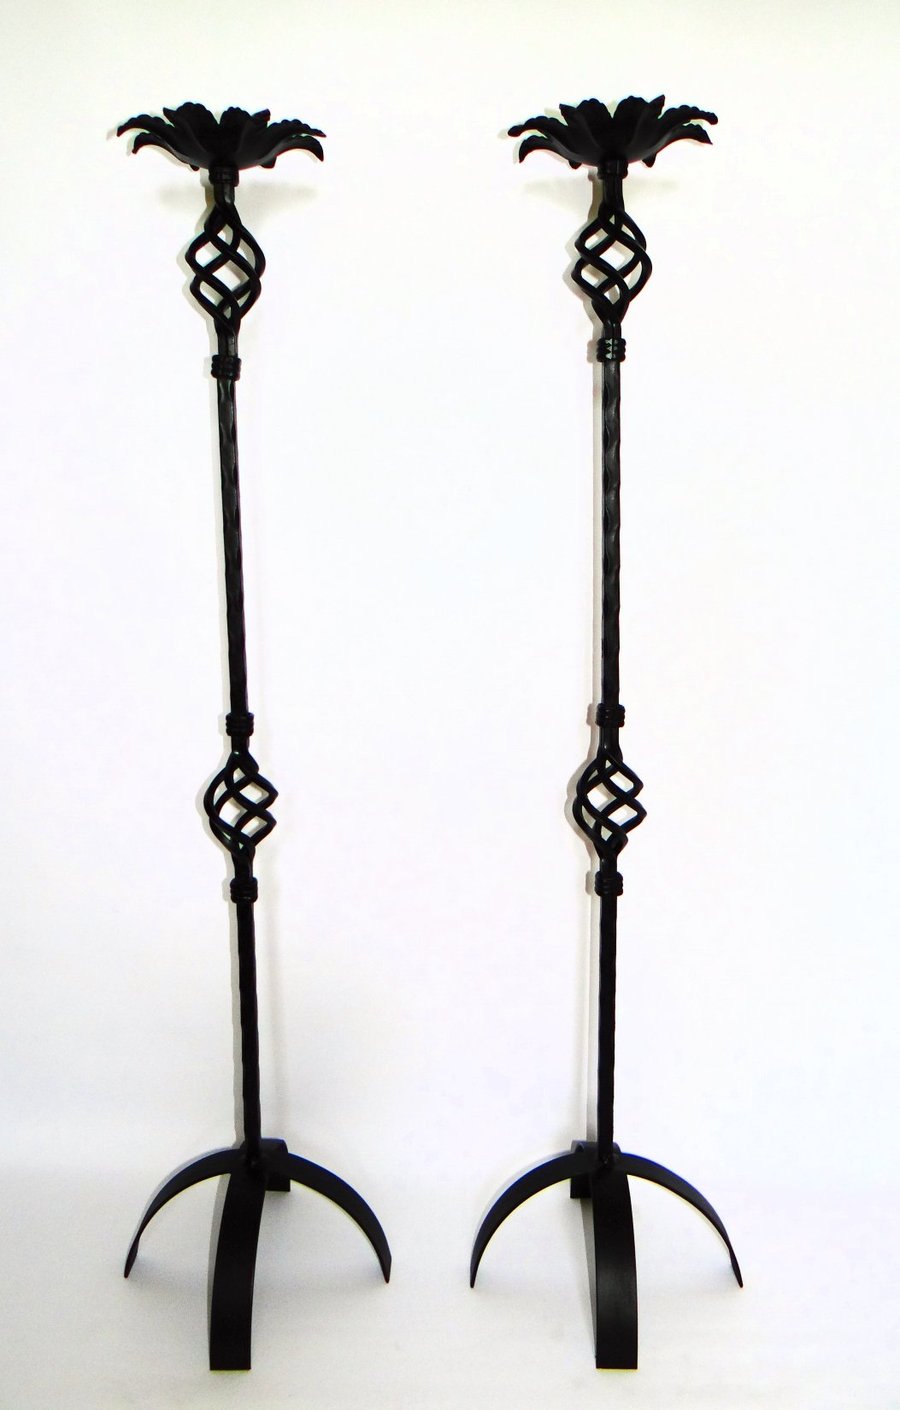 Wrought iron handmade traditional floor standing candle holders